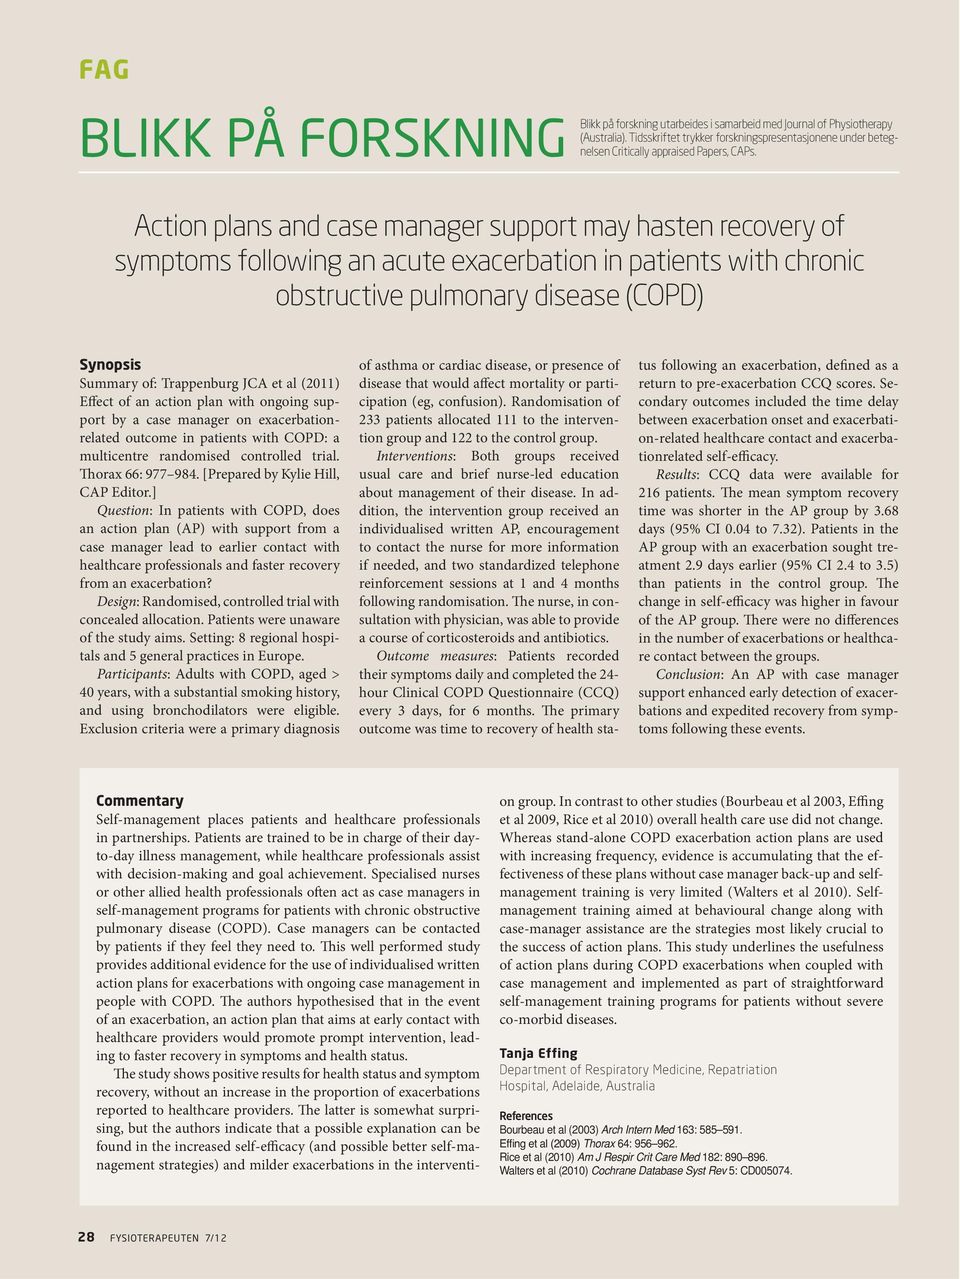 Action plans and case manager support may hasten recovery of symptoms following an acute exacerbation in patients with chronic obstructive pulmonary disease (COPD) Synopsis Summary of: Trappenburg